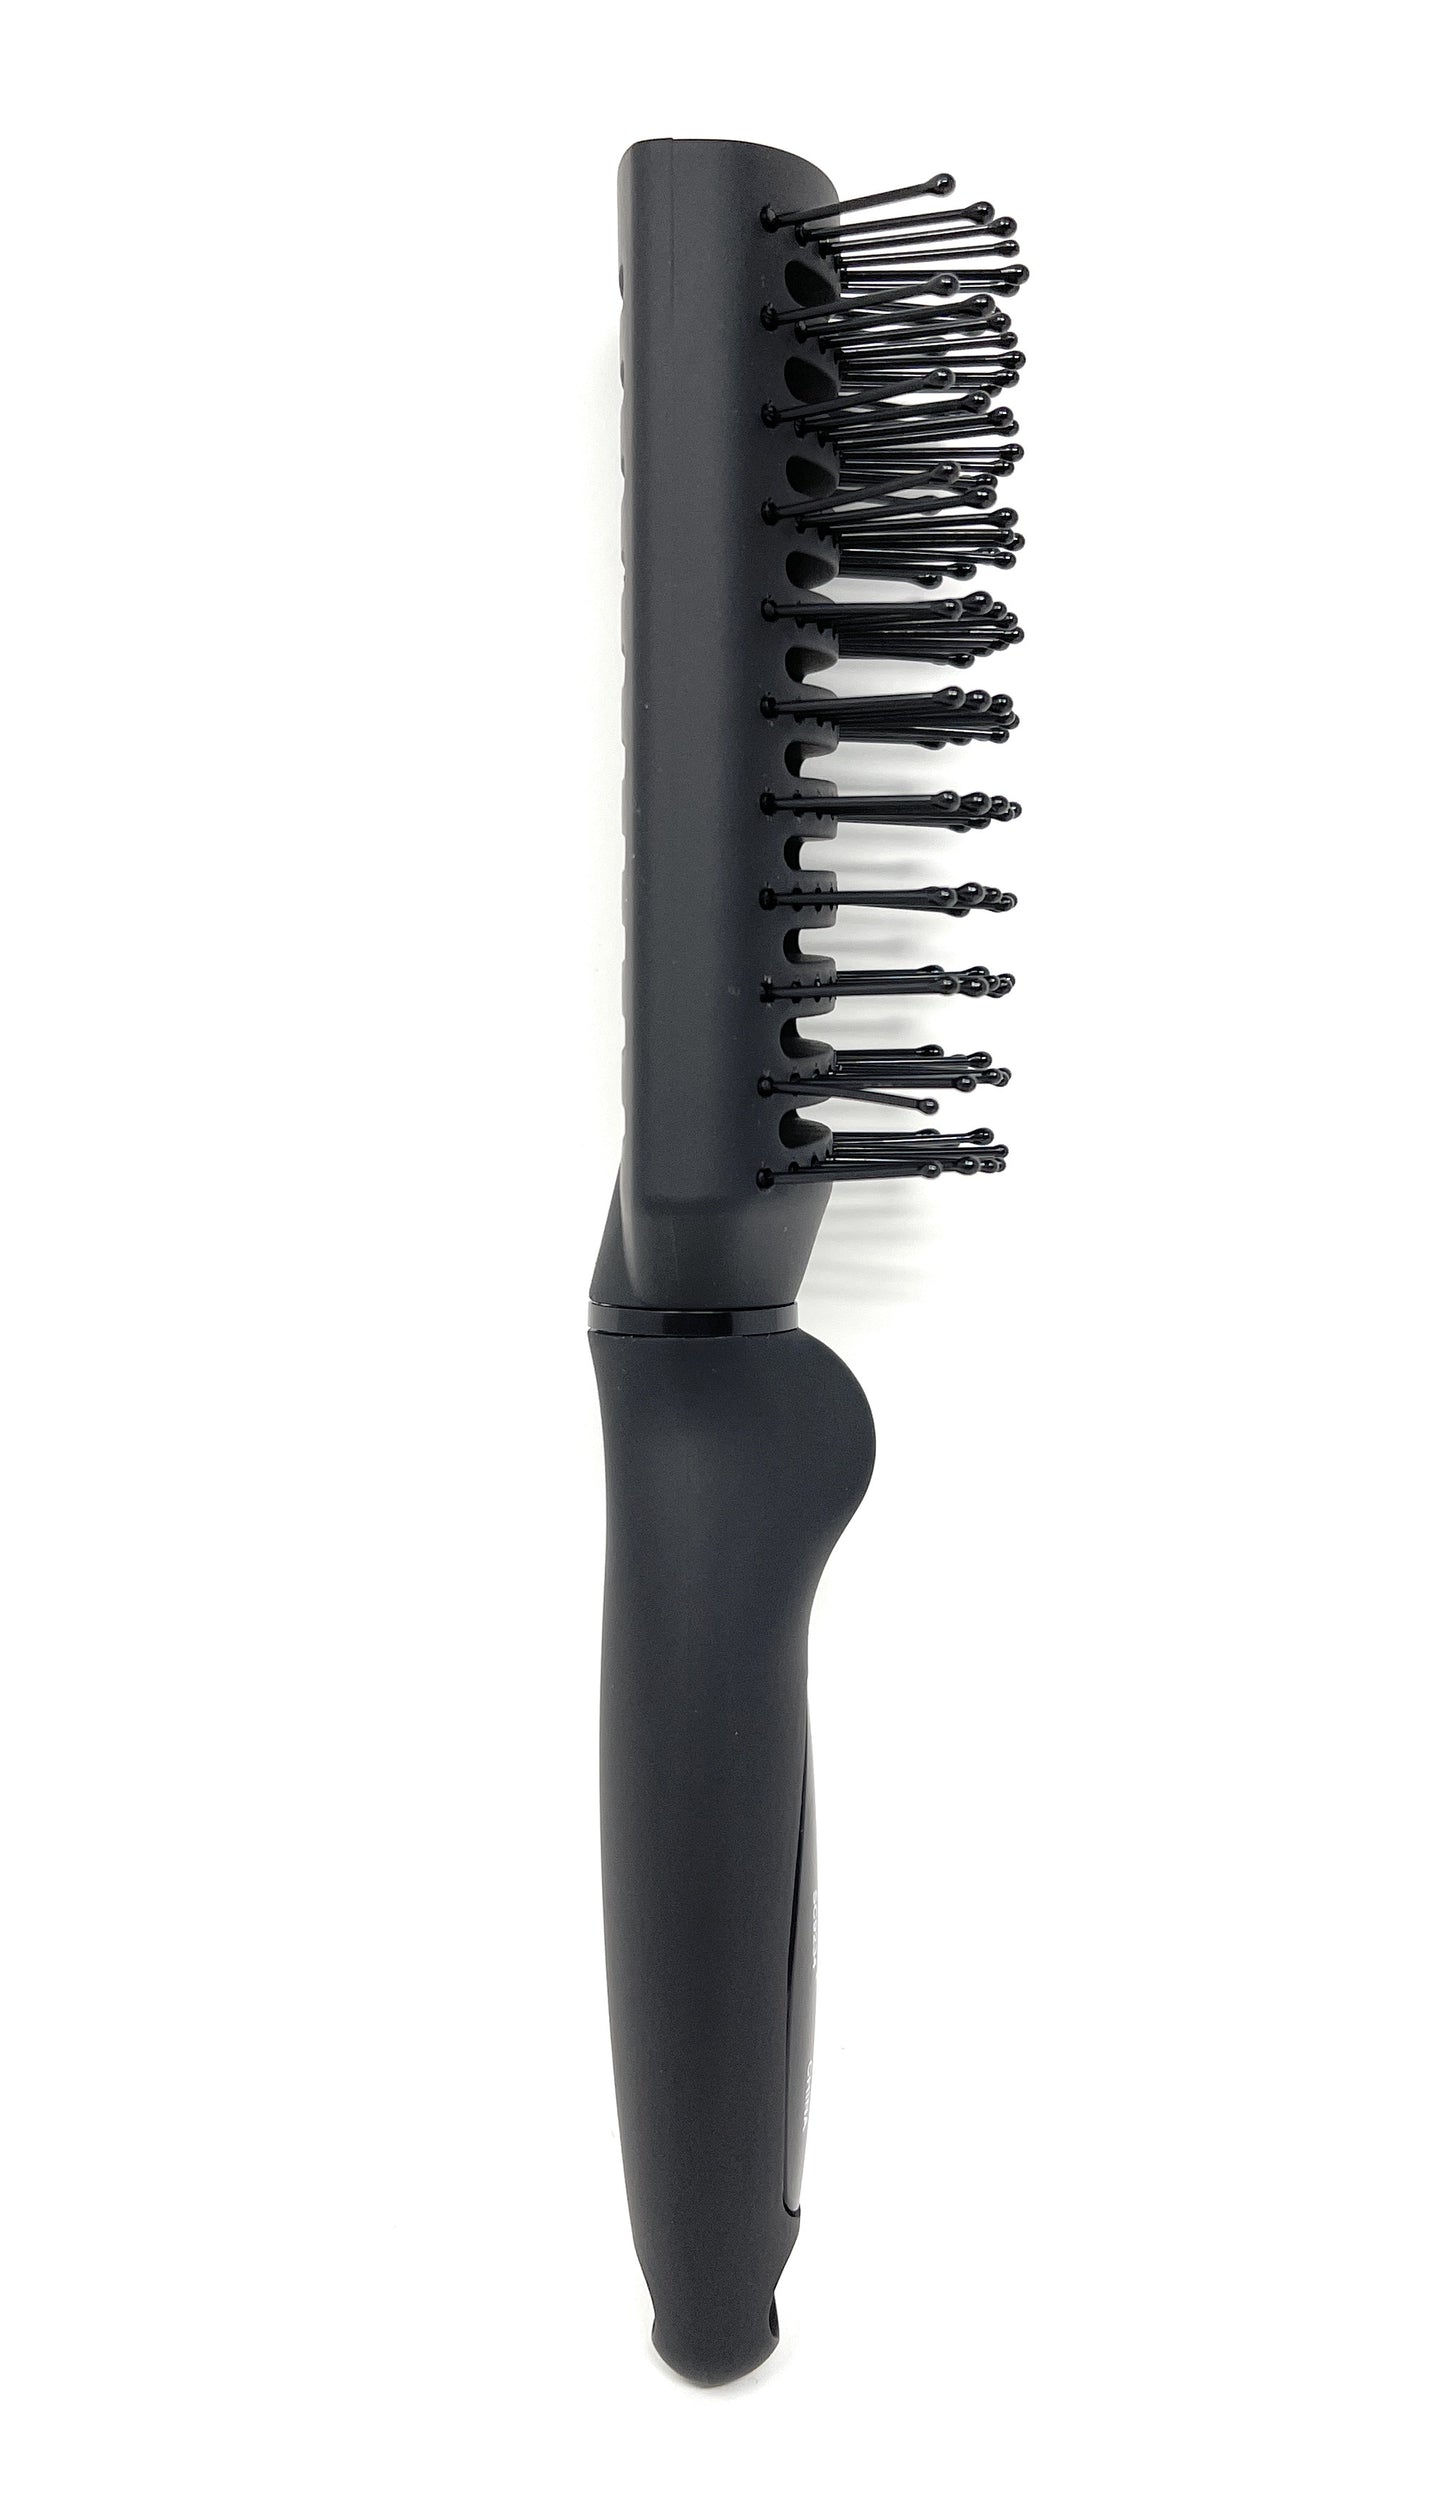 Scalpmaster Hair Brush Tunnel Vent Brush Ball-Tipped Rich Black Rubberized Finish 1 Pc.